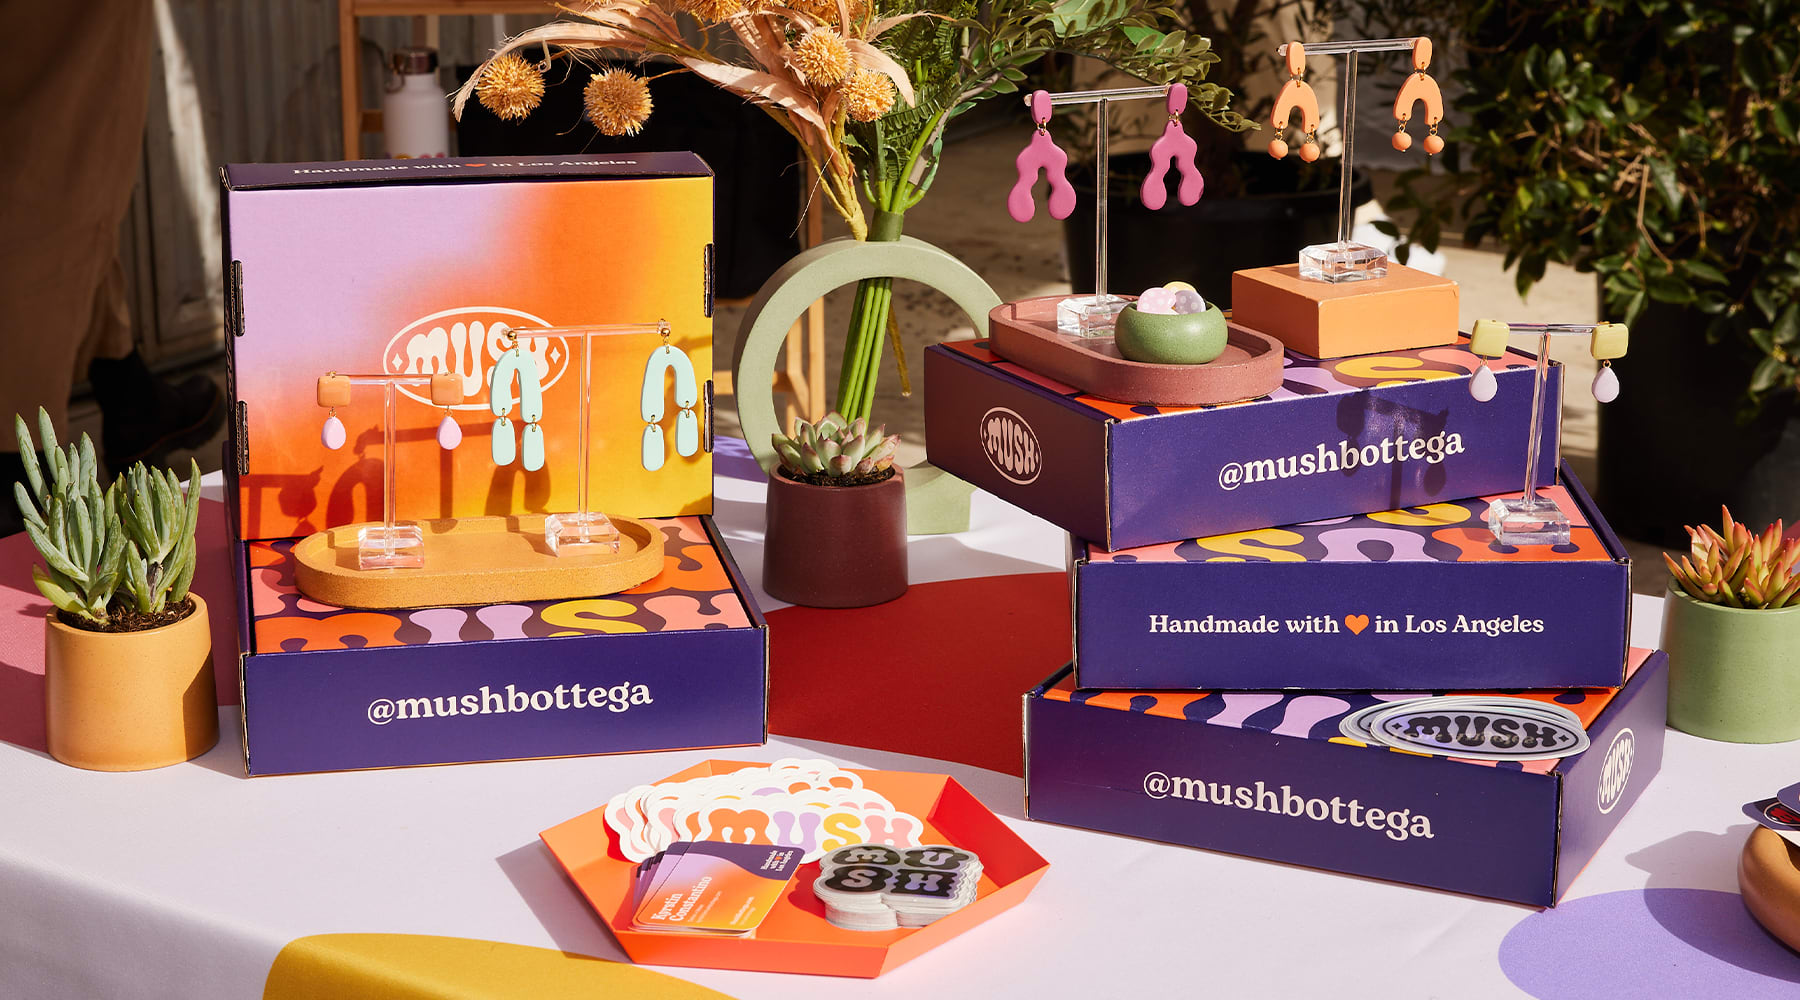 Bright and stand out packaging and product for Mush shows their business name idea and target audience working well together